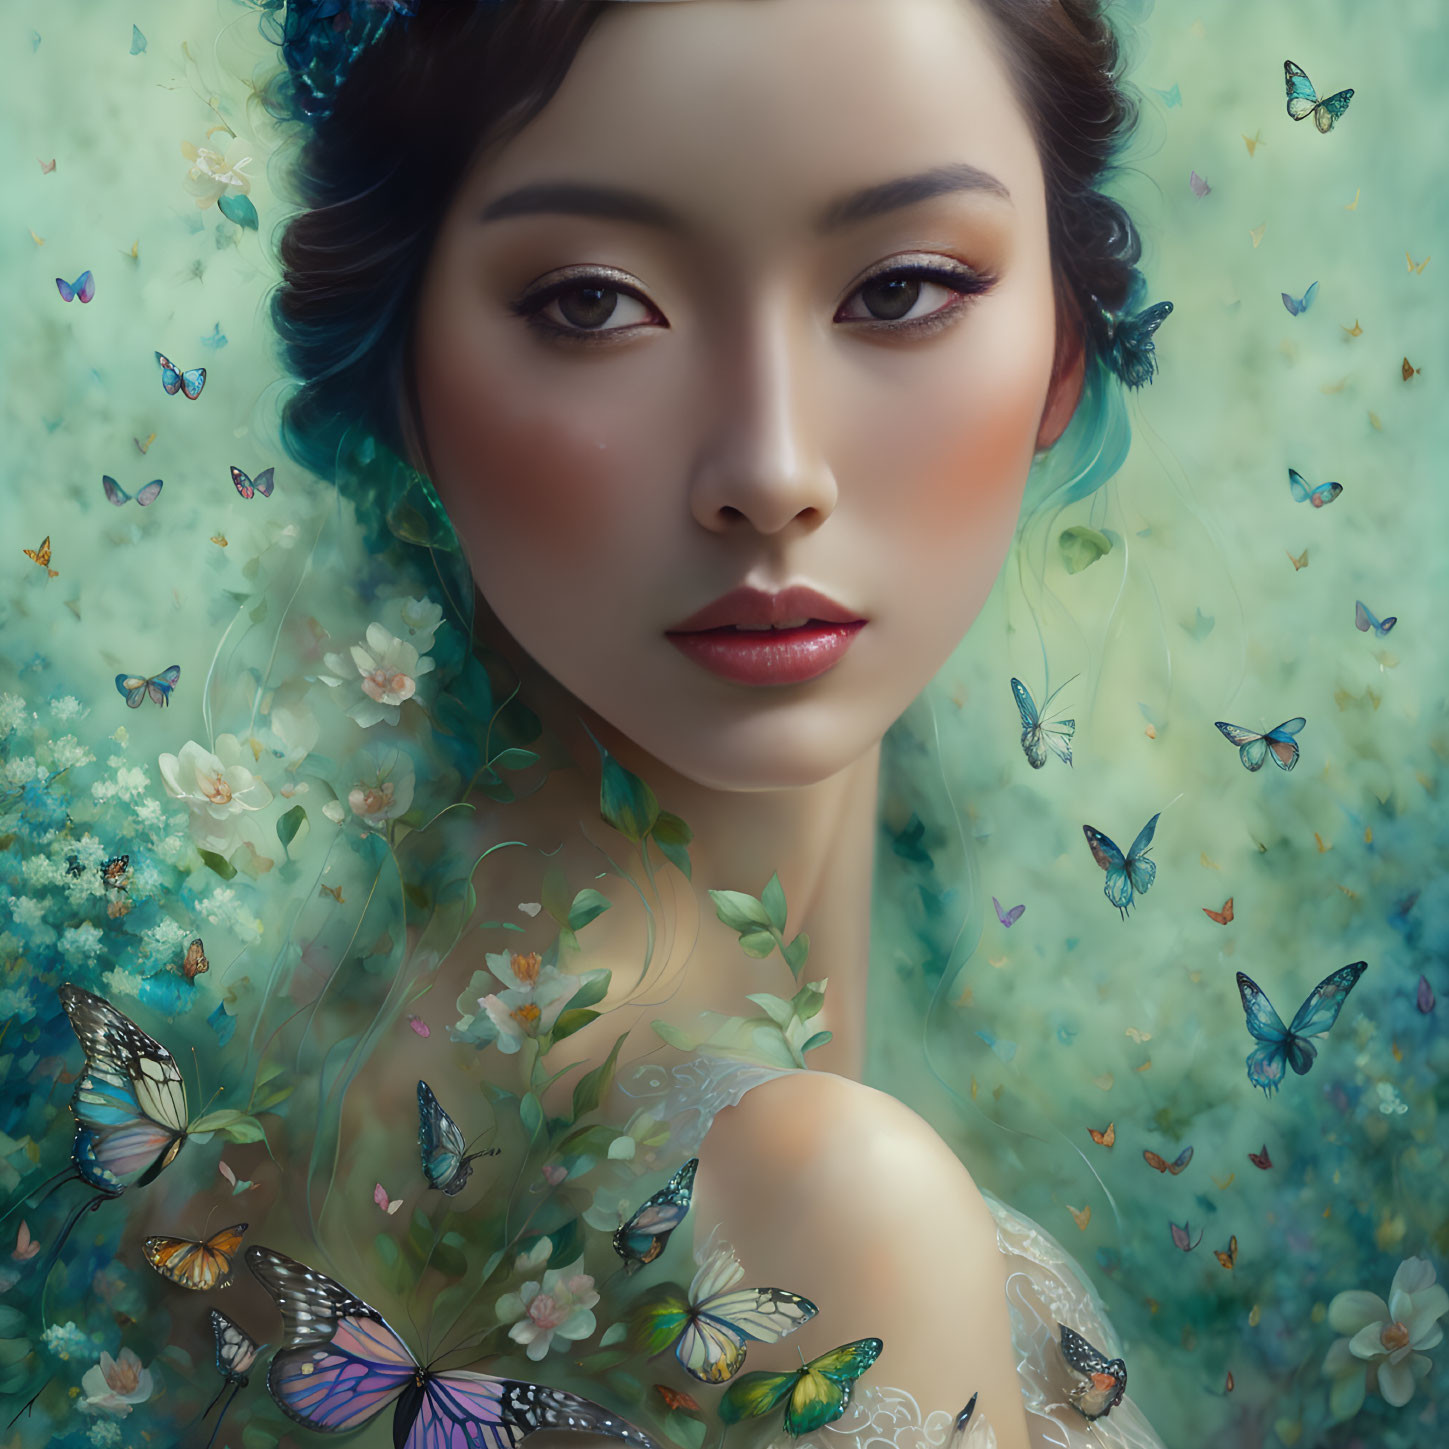 Stylized portrait of woman with butterflies and floral patterns